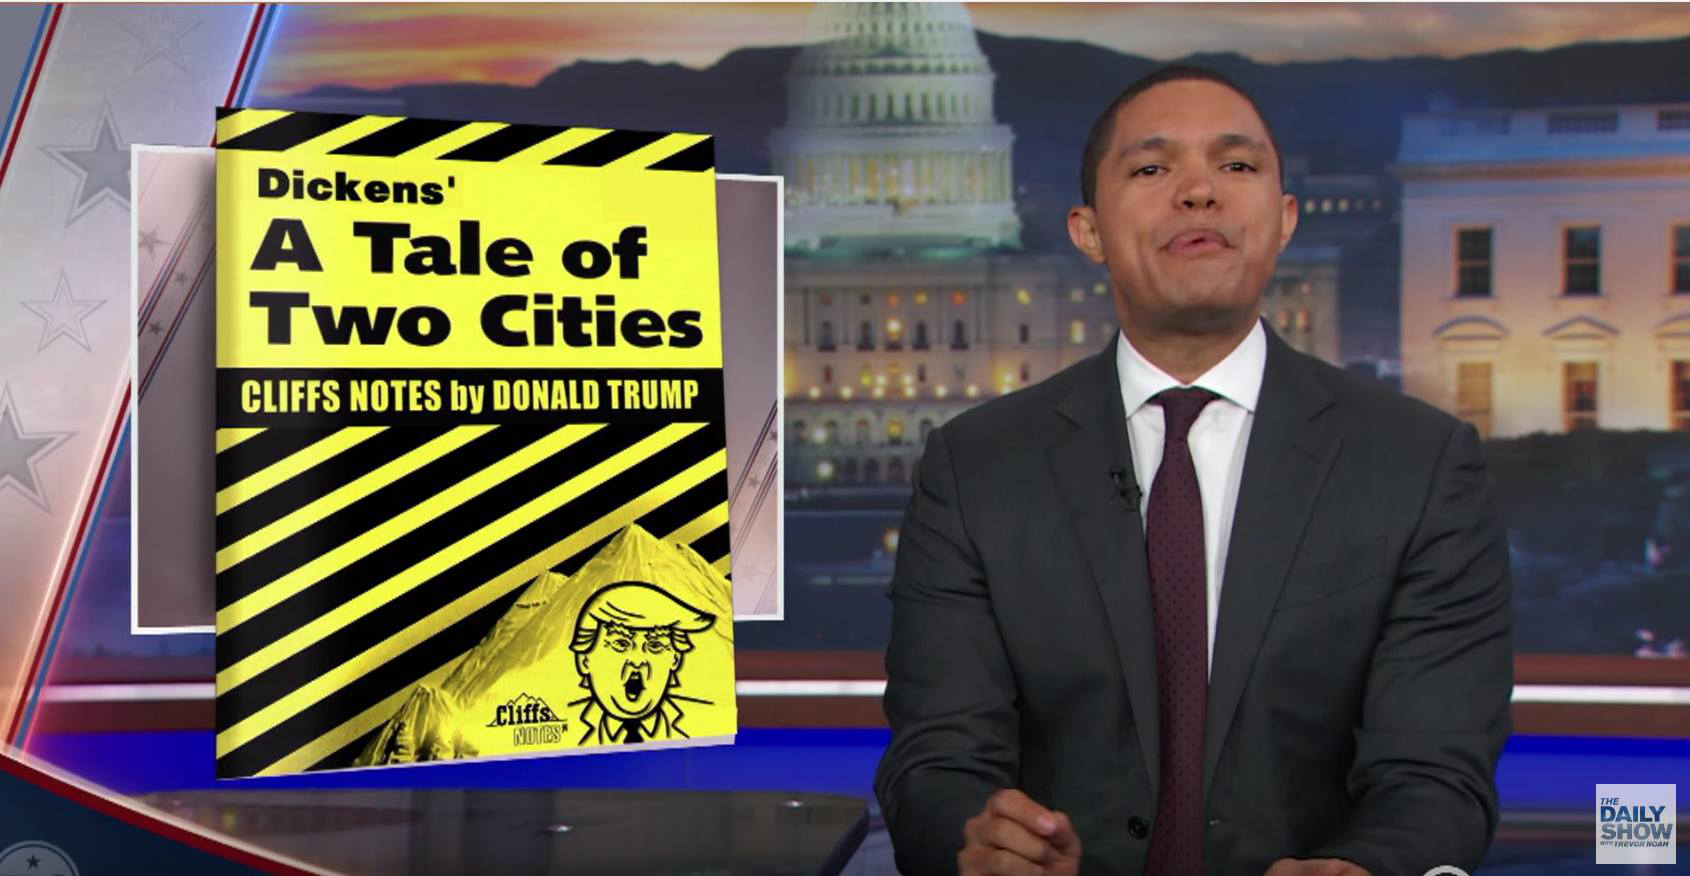 Trump icon on The Daily Show with Trevor Noah